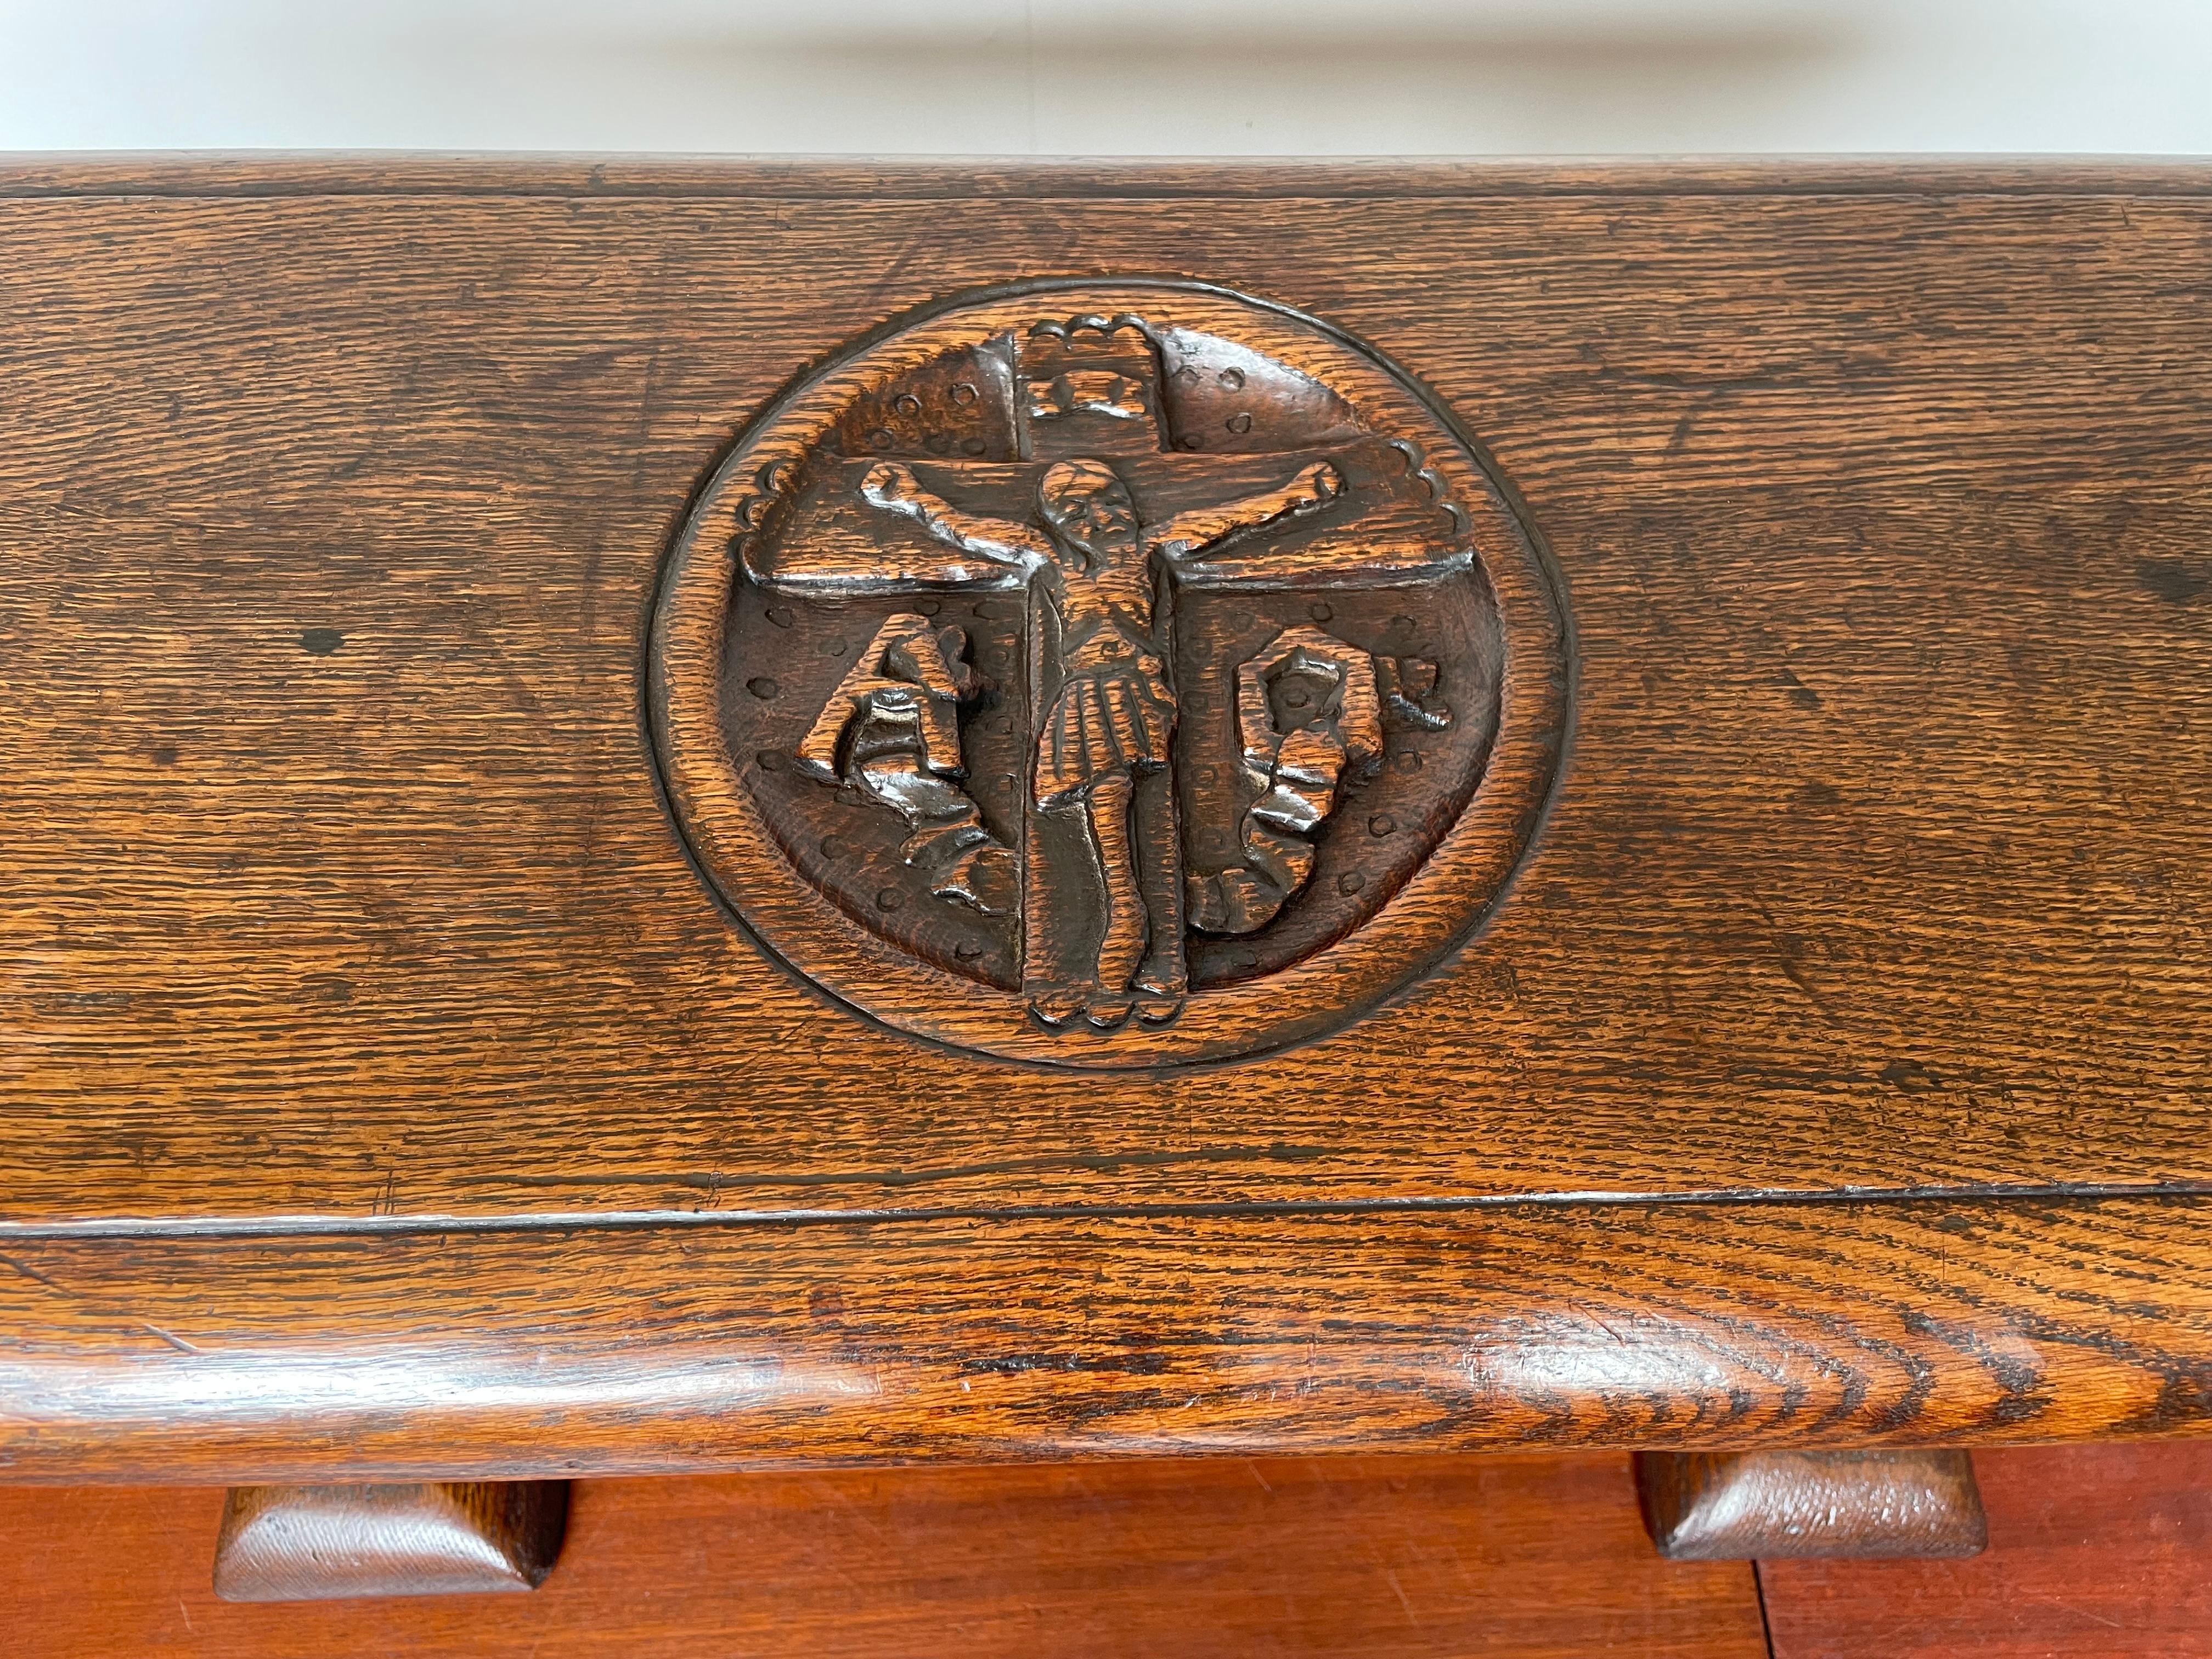 Gothic Revival Stool / Bench with Hand Carved Christ on Crucifix Sculpture 1800s For Sale 10